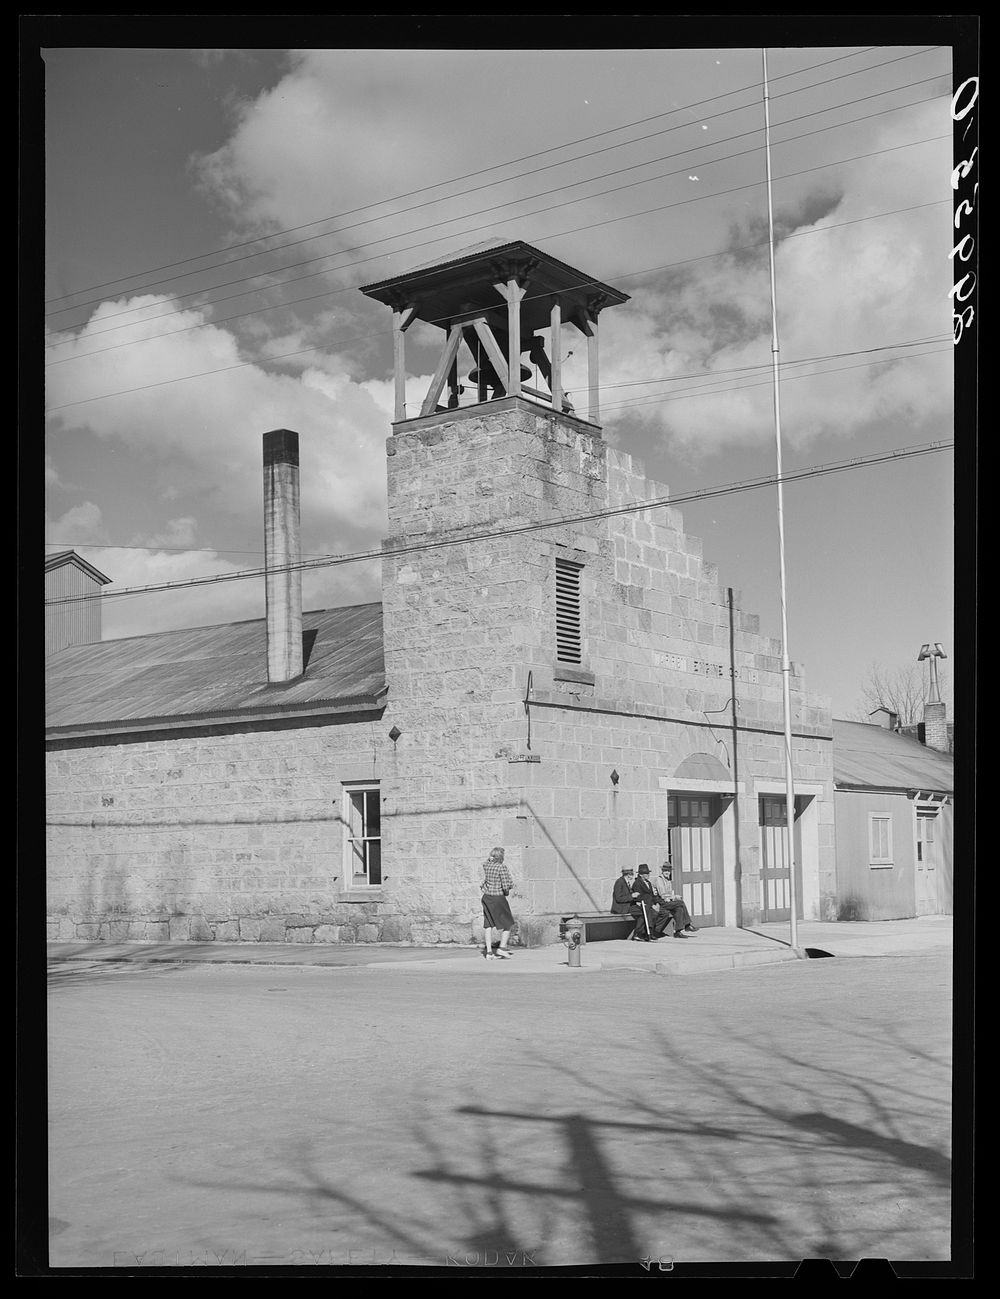 [Untitled photo, possibly related to: Firehouse. Carson City, Nevada]. Sourced from the Library of Congress.